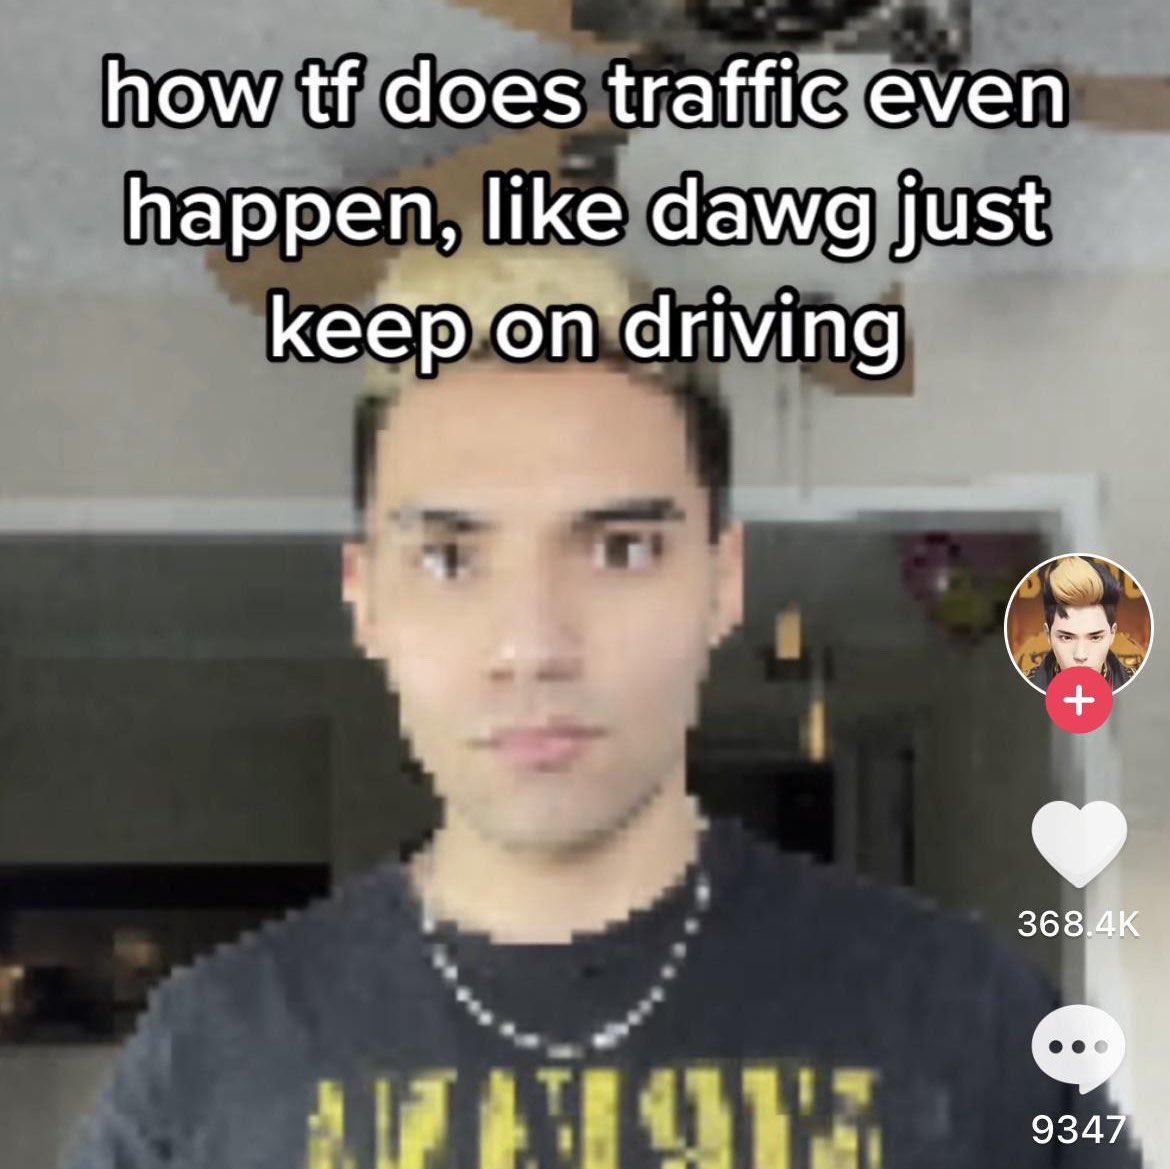 TikTok screenshots - photo caption - how tf does traffic even happen, dawg just keep on driving T x 9347